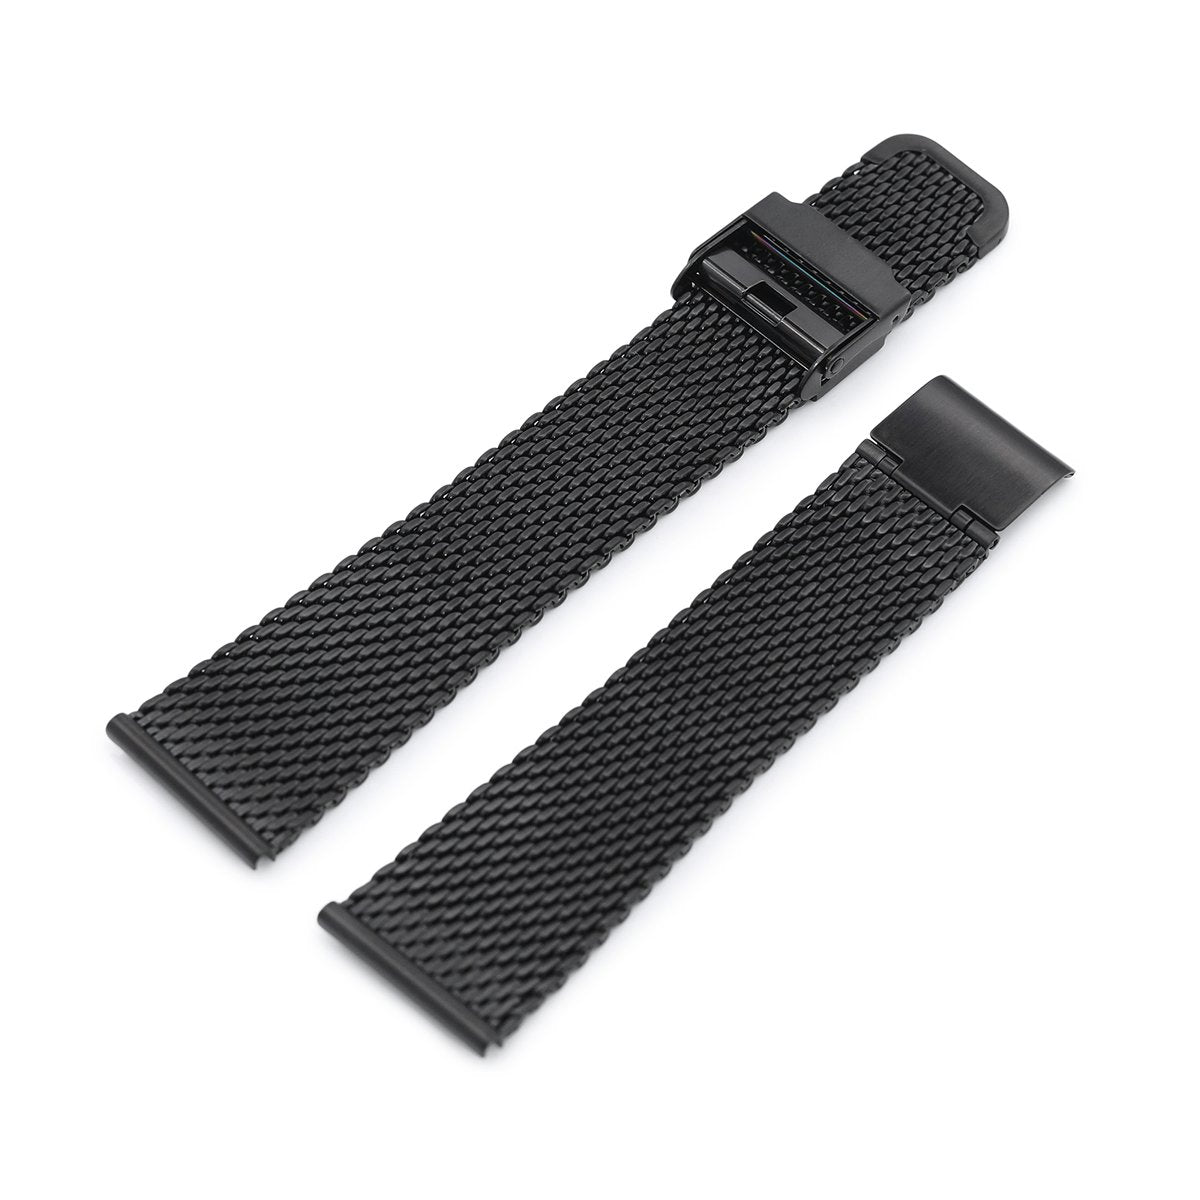 MiLTAT 20mm Tapered Milanese Watch Band, Brushed Classic Petite